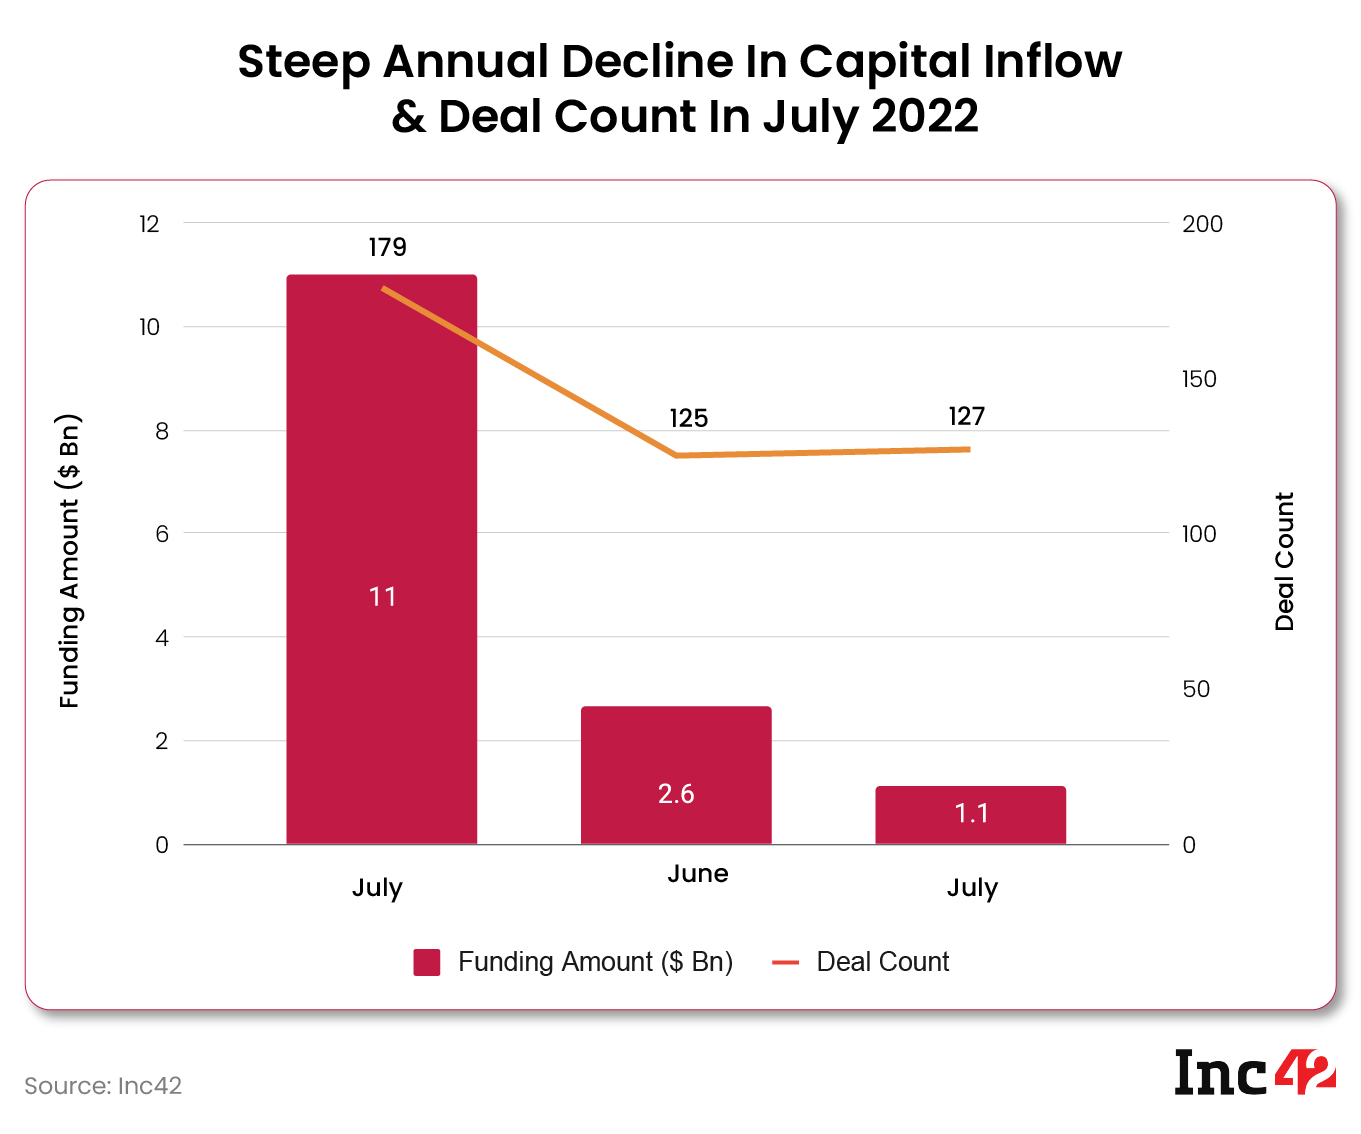 A steep decline year-on-year in startup funding